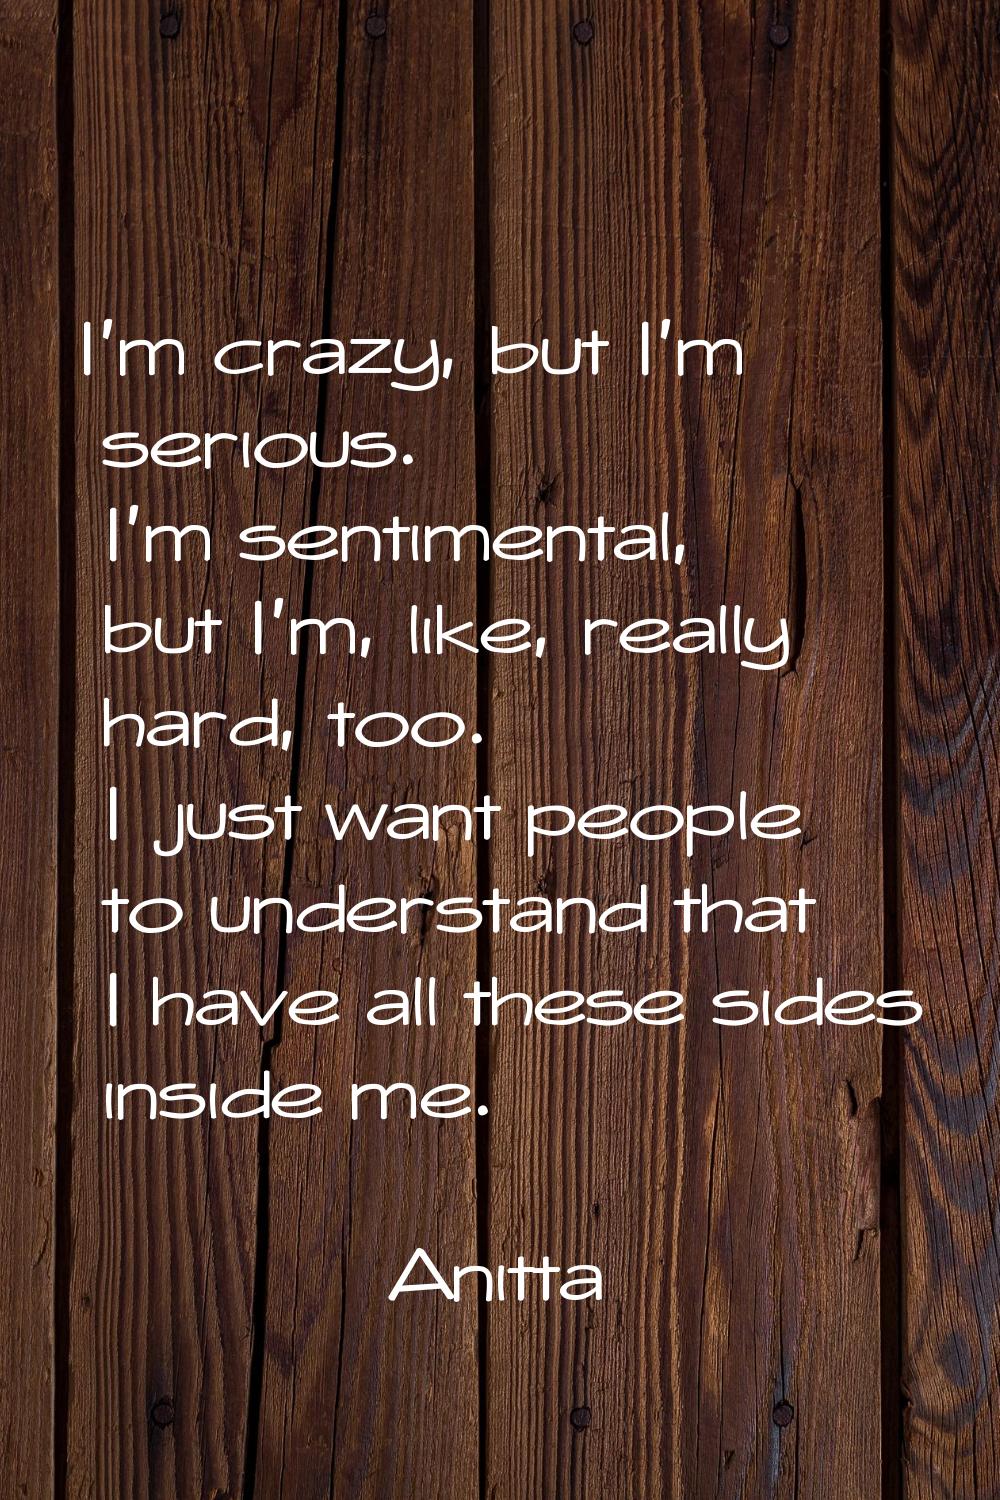 I'm crazy, but I'm serious. I'm sentimental, but I'm, like, really hard, too. I just want people to